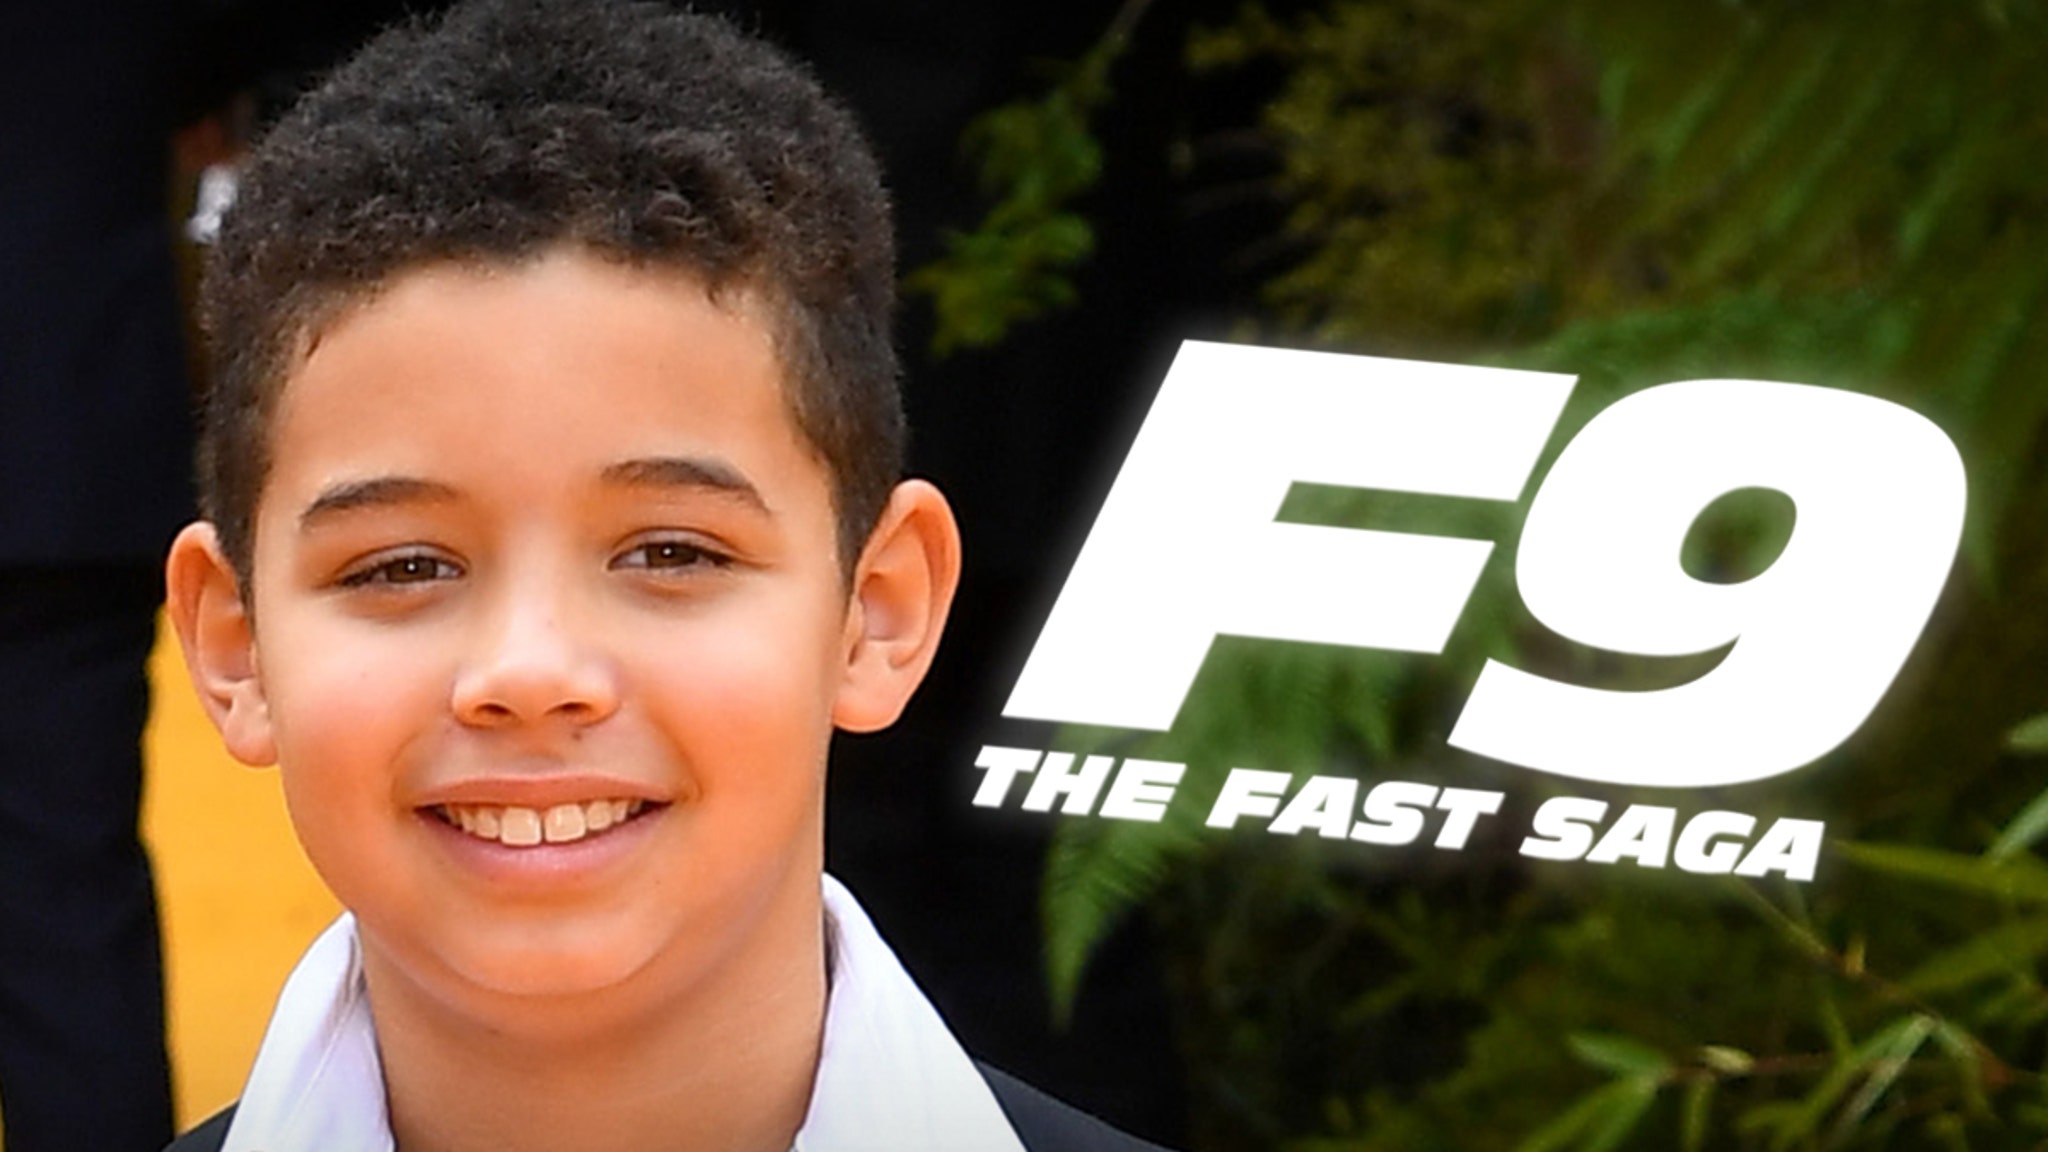 Vin Diesel’s son joining the Fast & Furious franchise as Younger Dom